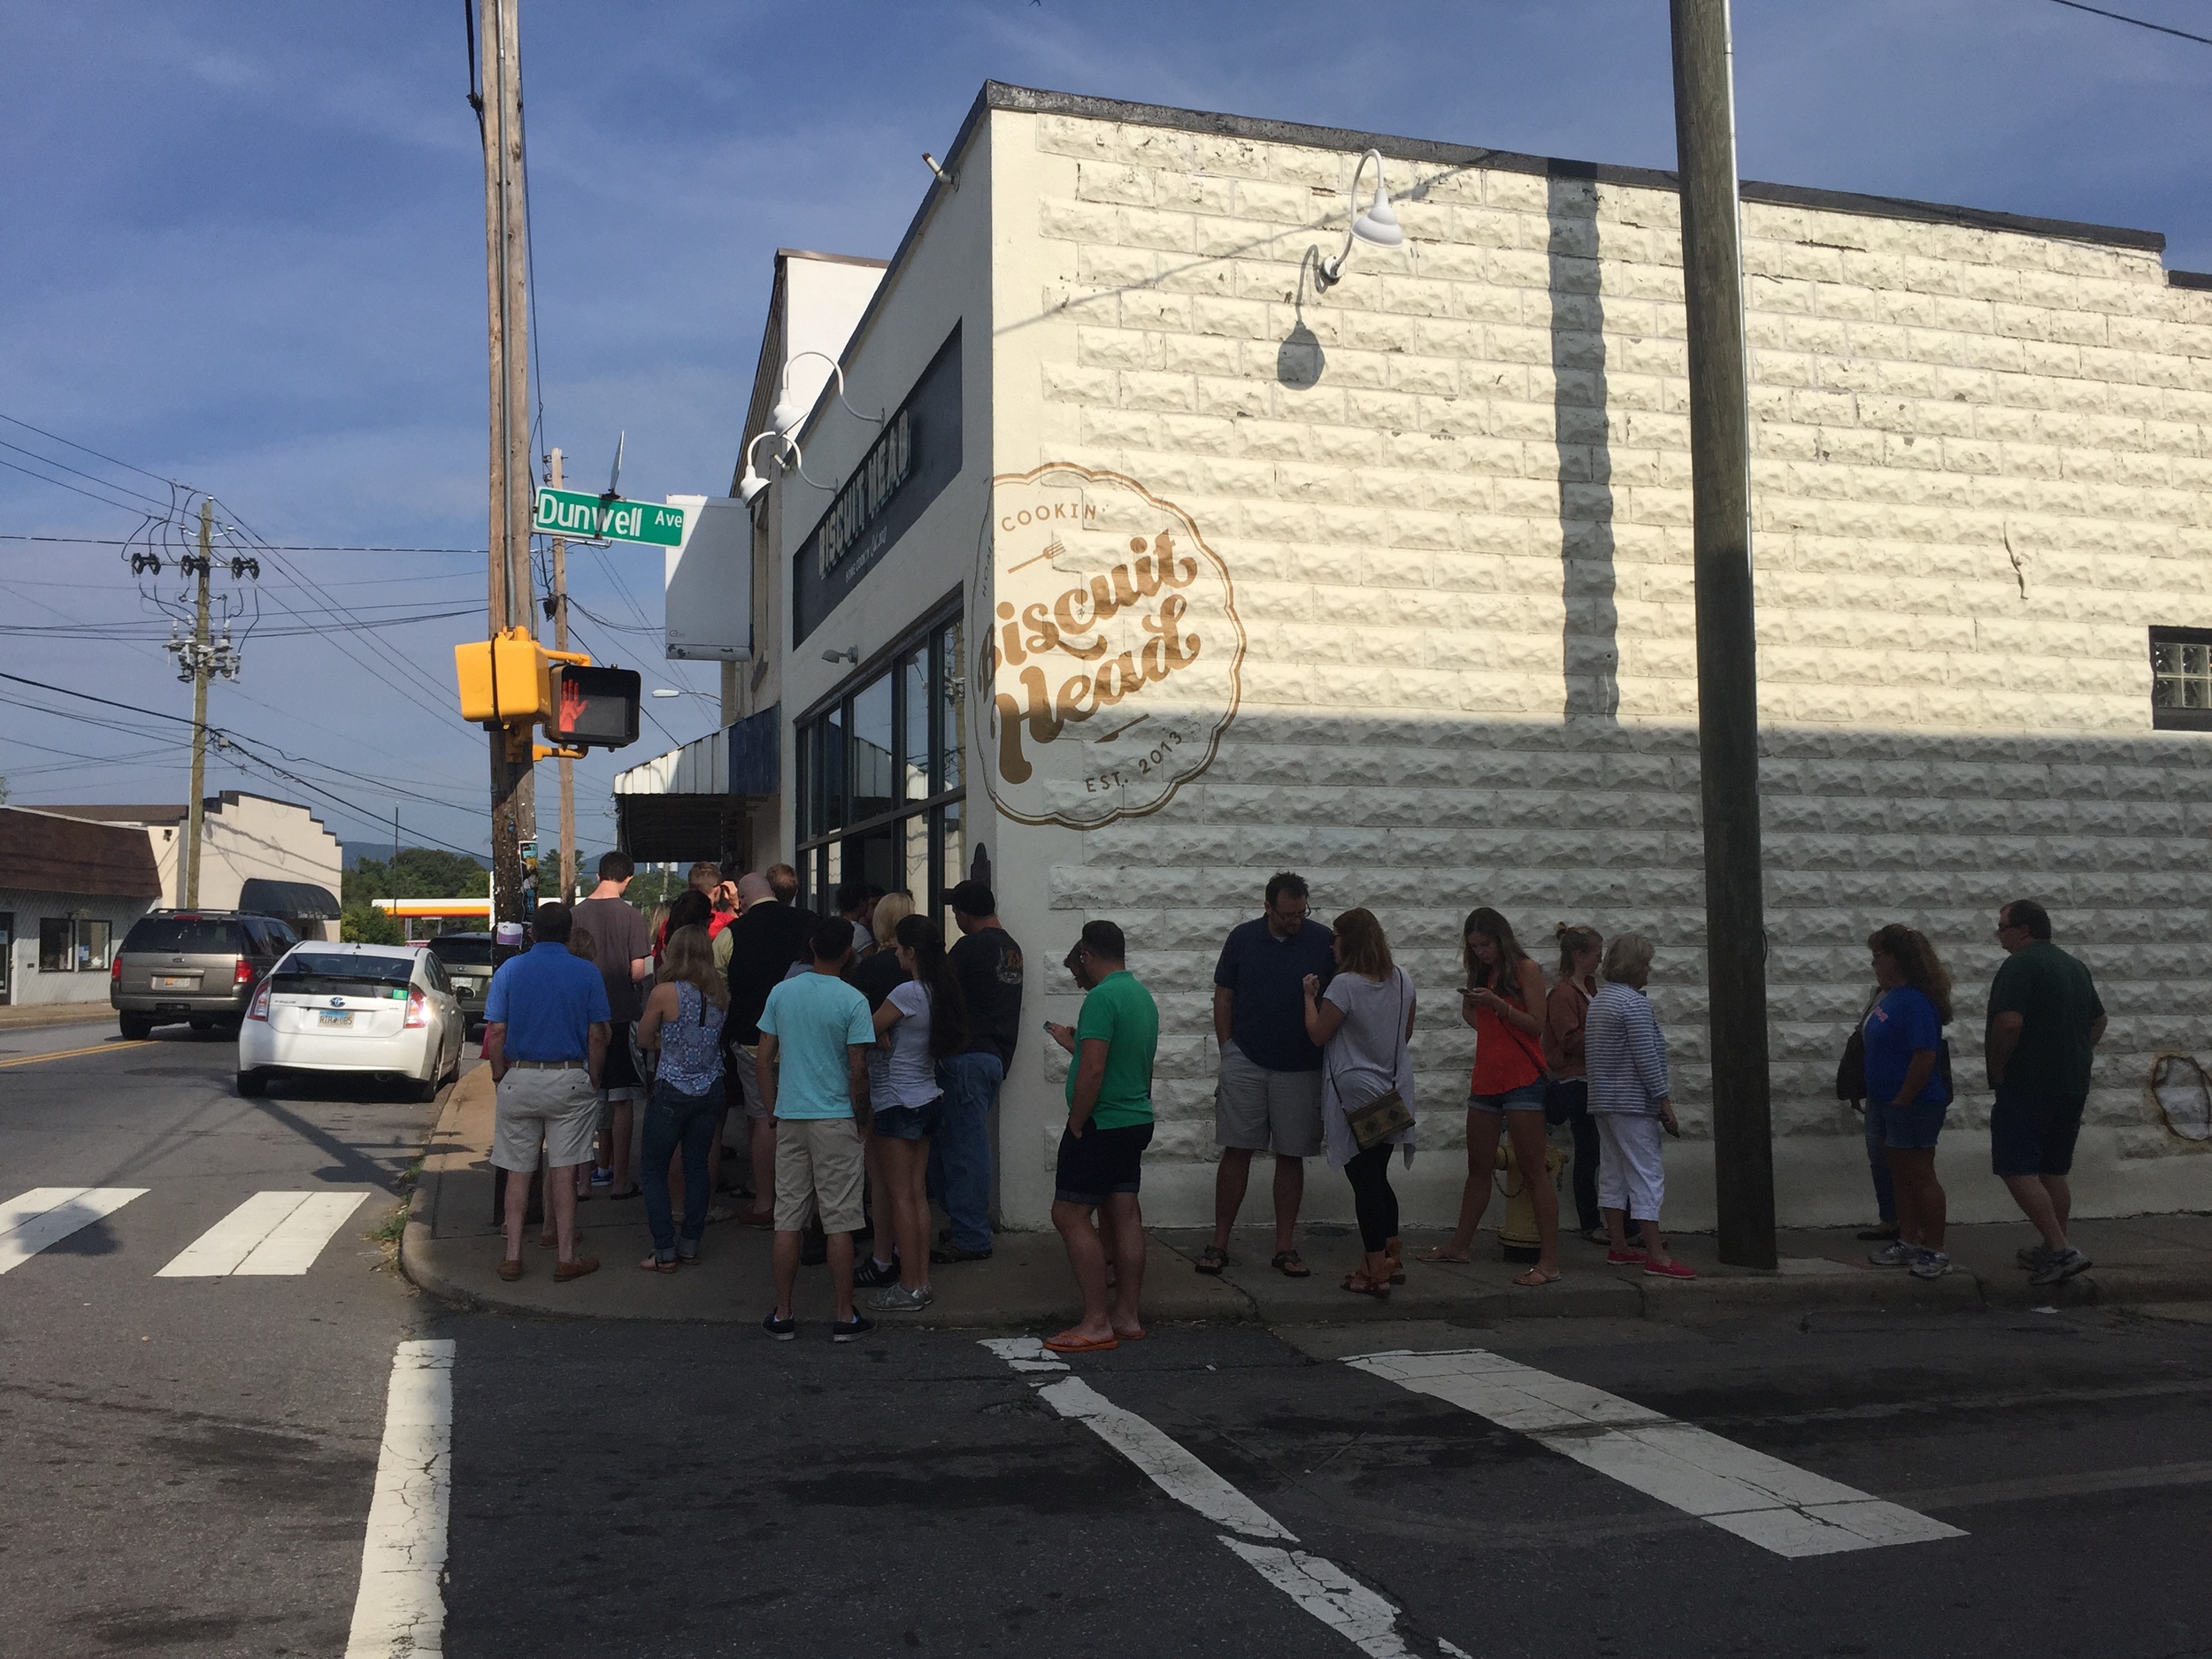 These 75 people have to eat biscuits before you